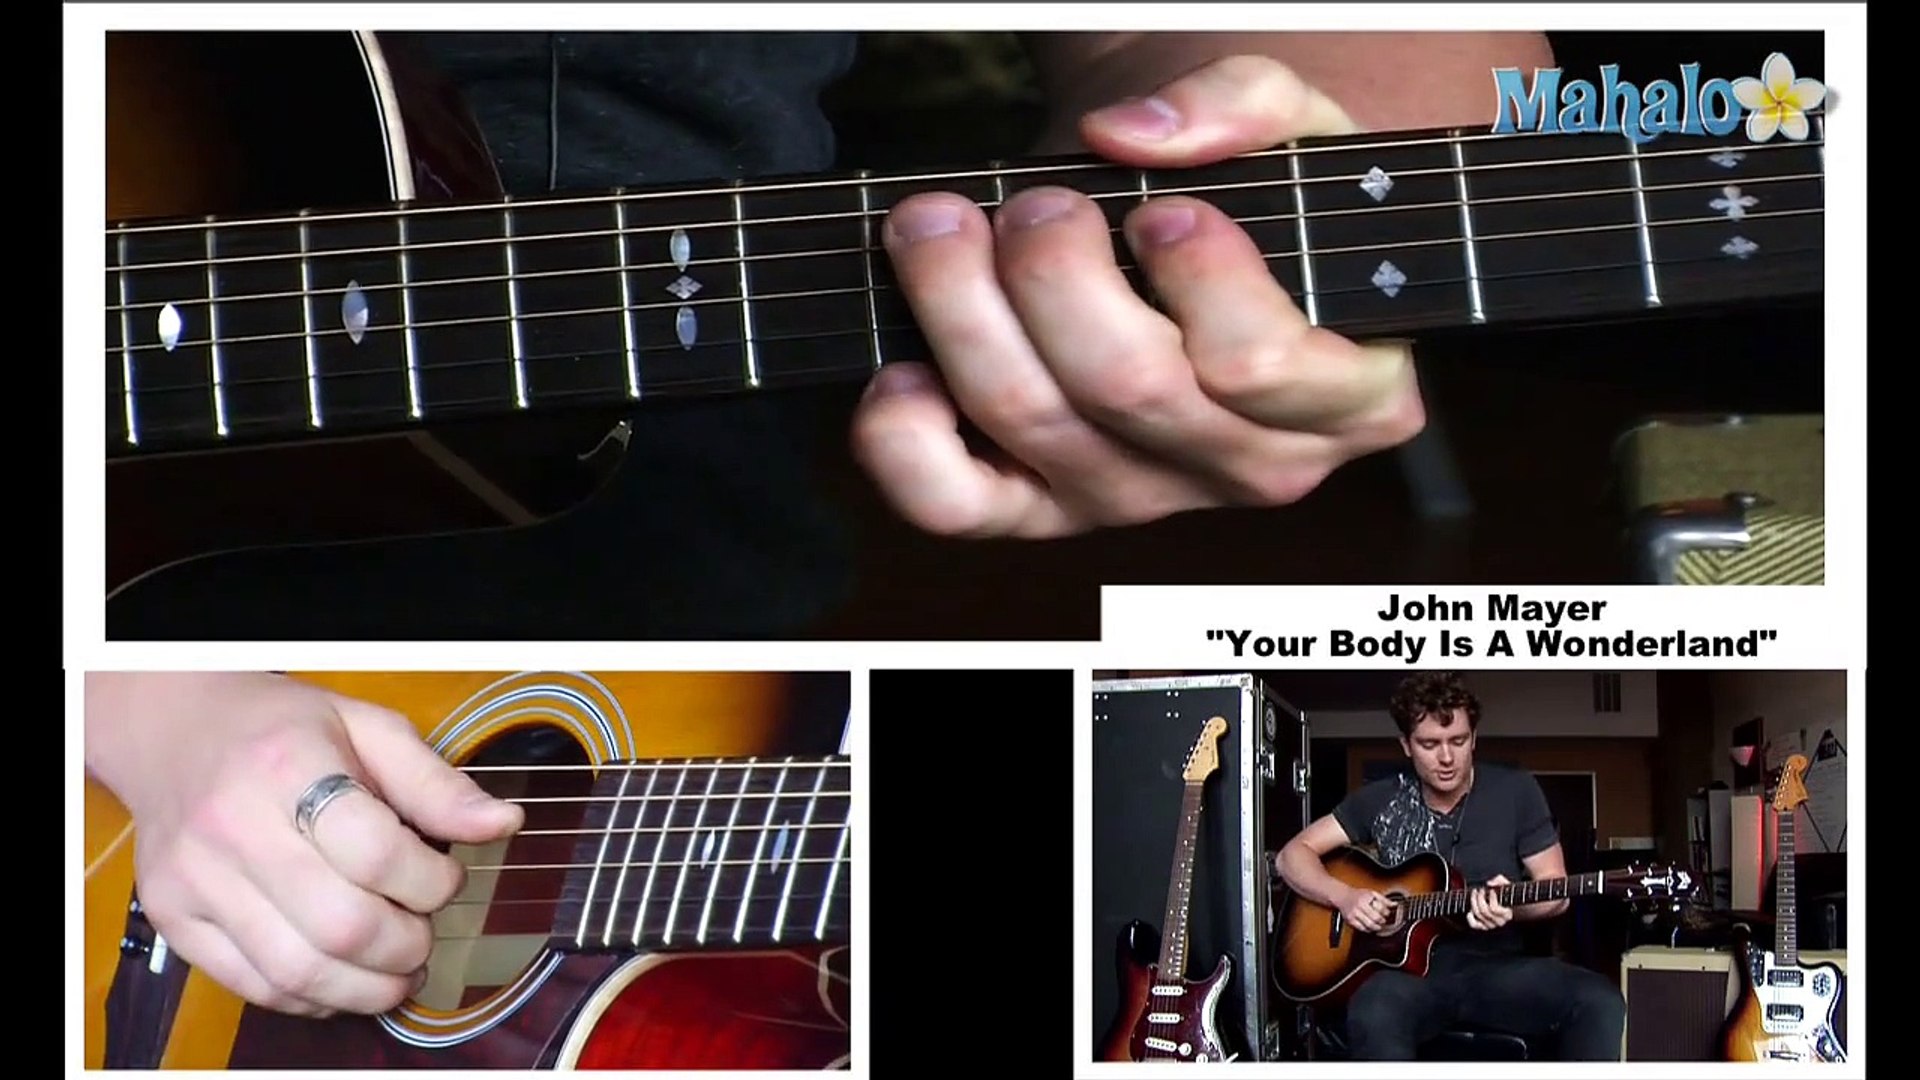 How To Play Your Body Is A Wonderland By John Mayer On Guitar - video  Dailymotion